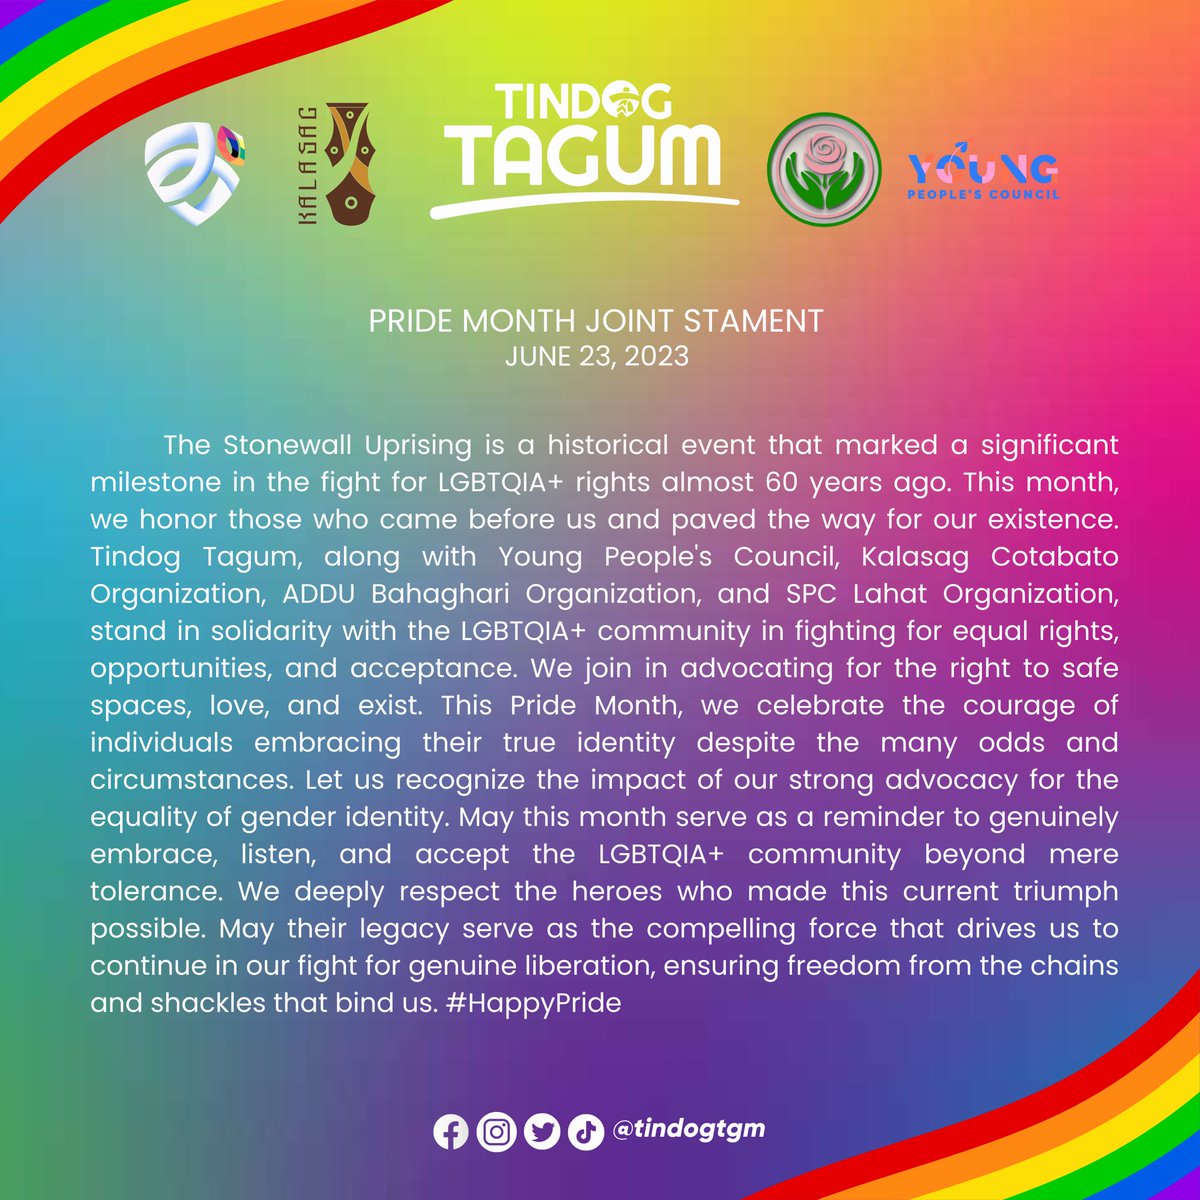 READ | A unity joint statement of organizations supporting and highlighting the importance of Equality and celebrating Pride Month.

Young People’s Council PH
BAHAGHARI - AdDU
SPC LAHAT PARTY
Kalasag

#TindogTagum
#PrideMonth
#SOGIEEqualityNow